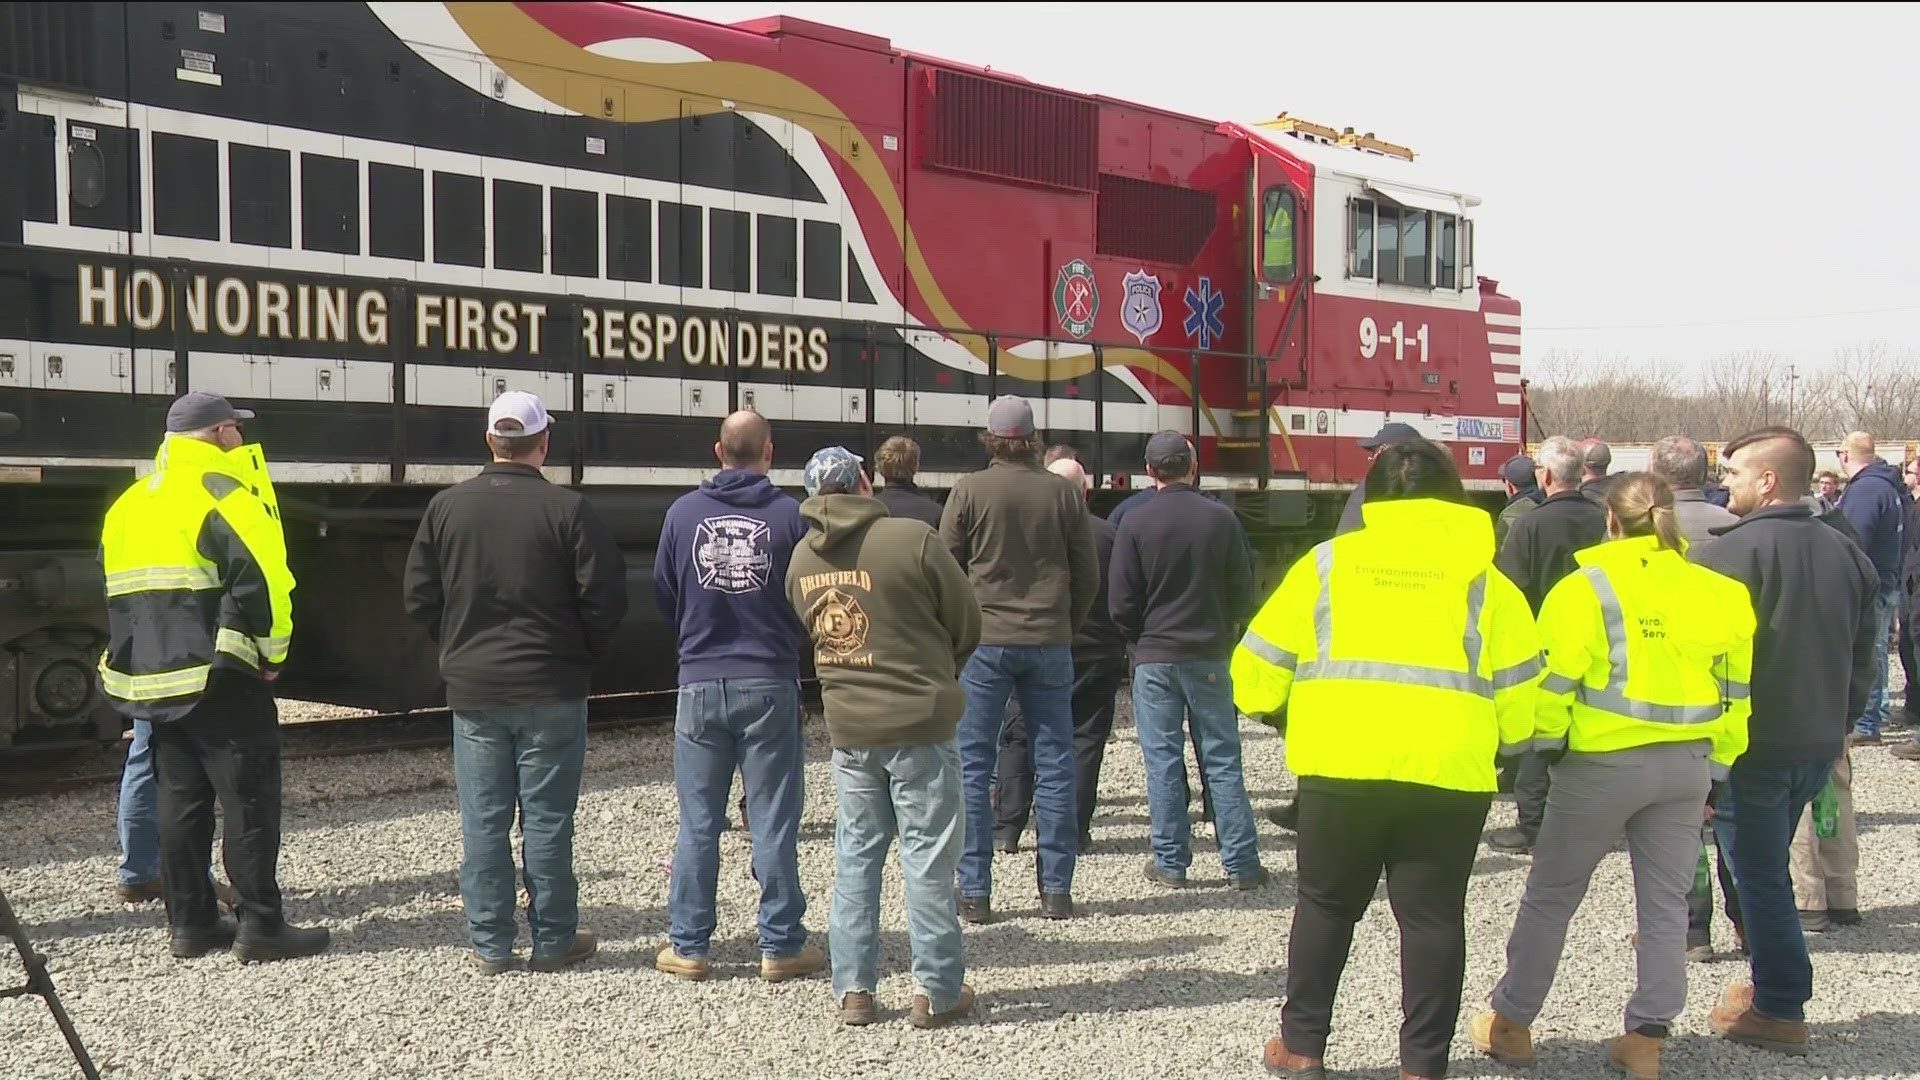 The training was scheduled before the East Palestine train derailment. But now, area first responders are more equipped to handle similar crises.